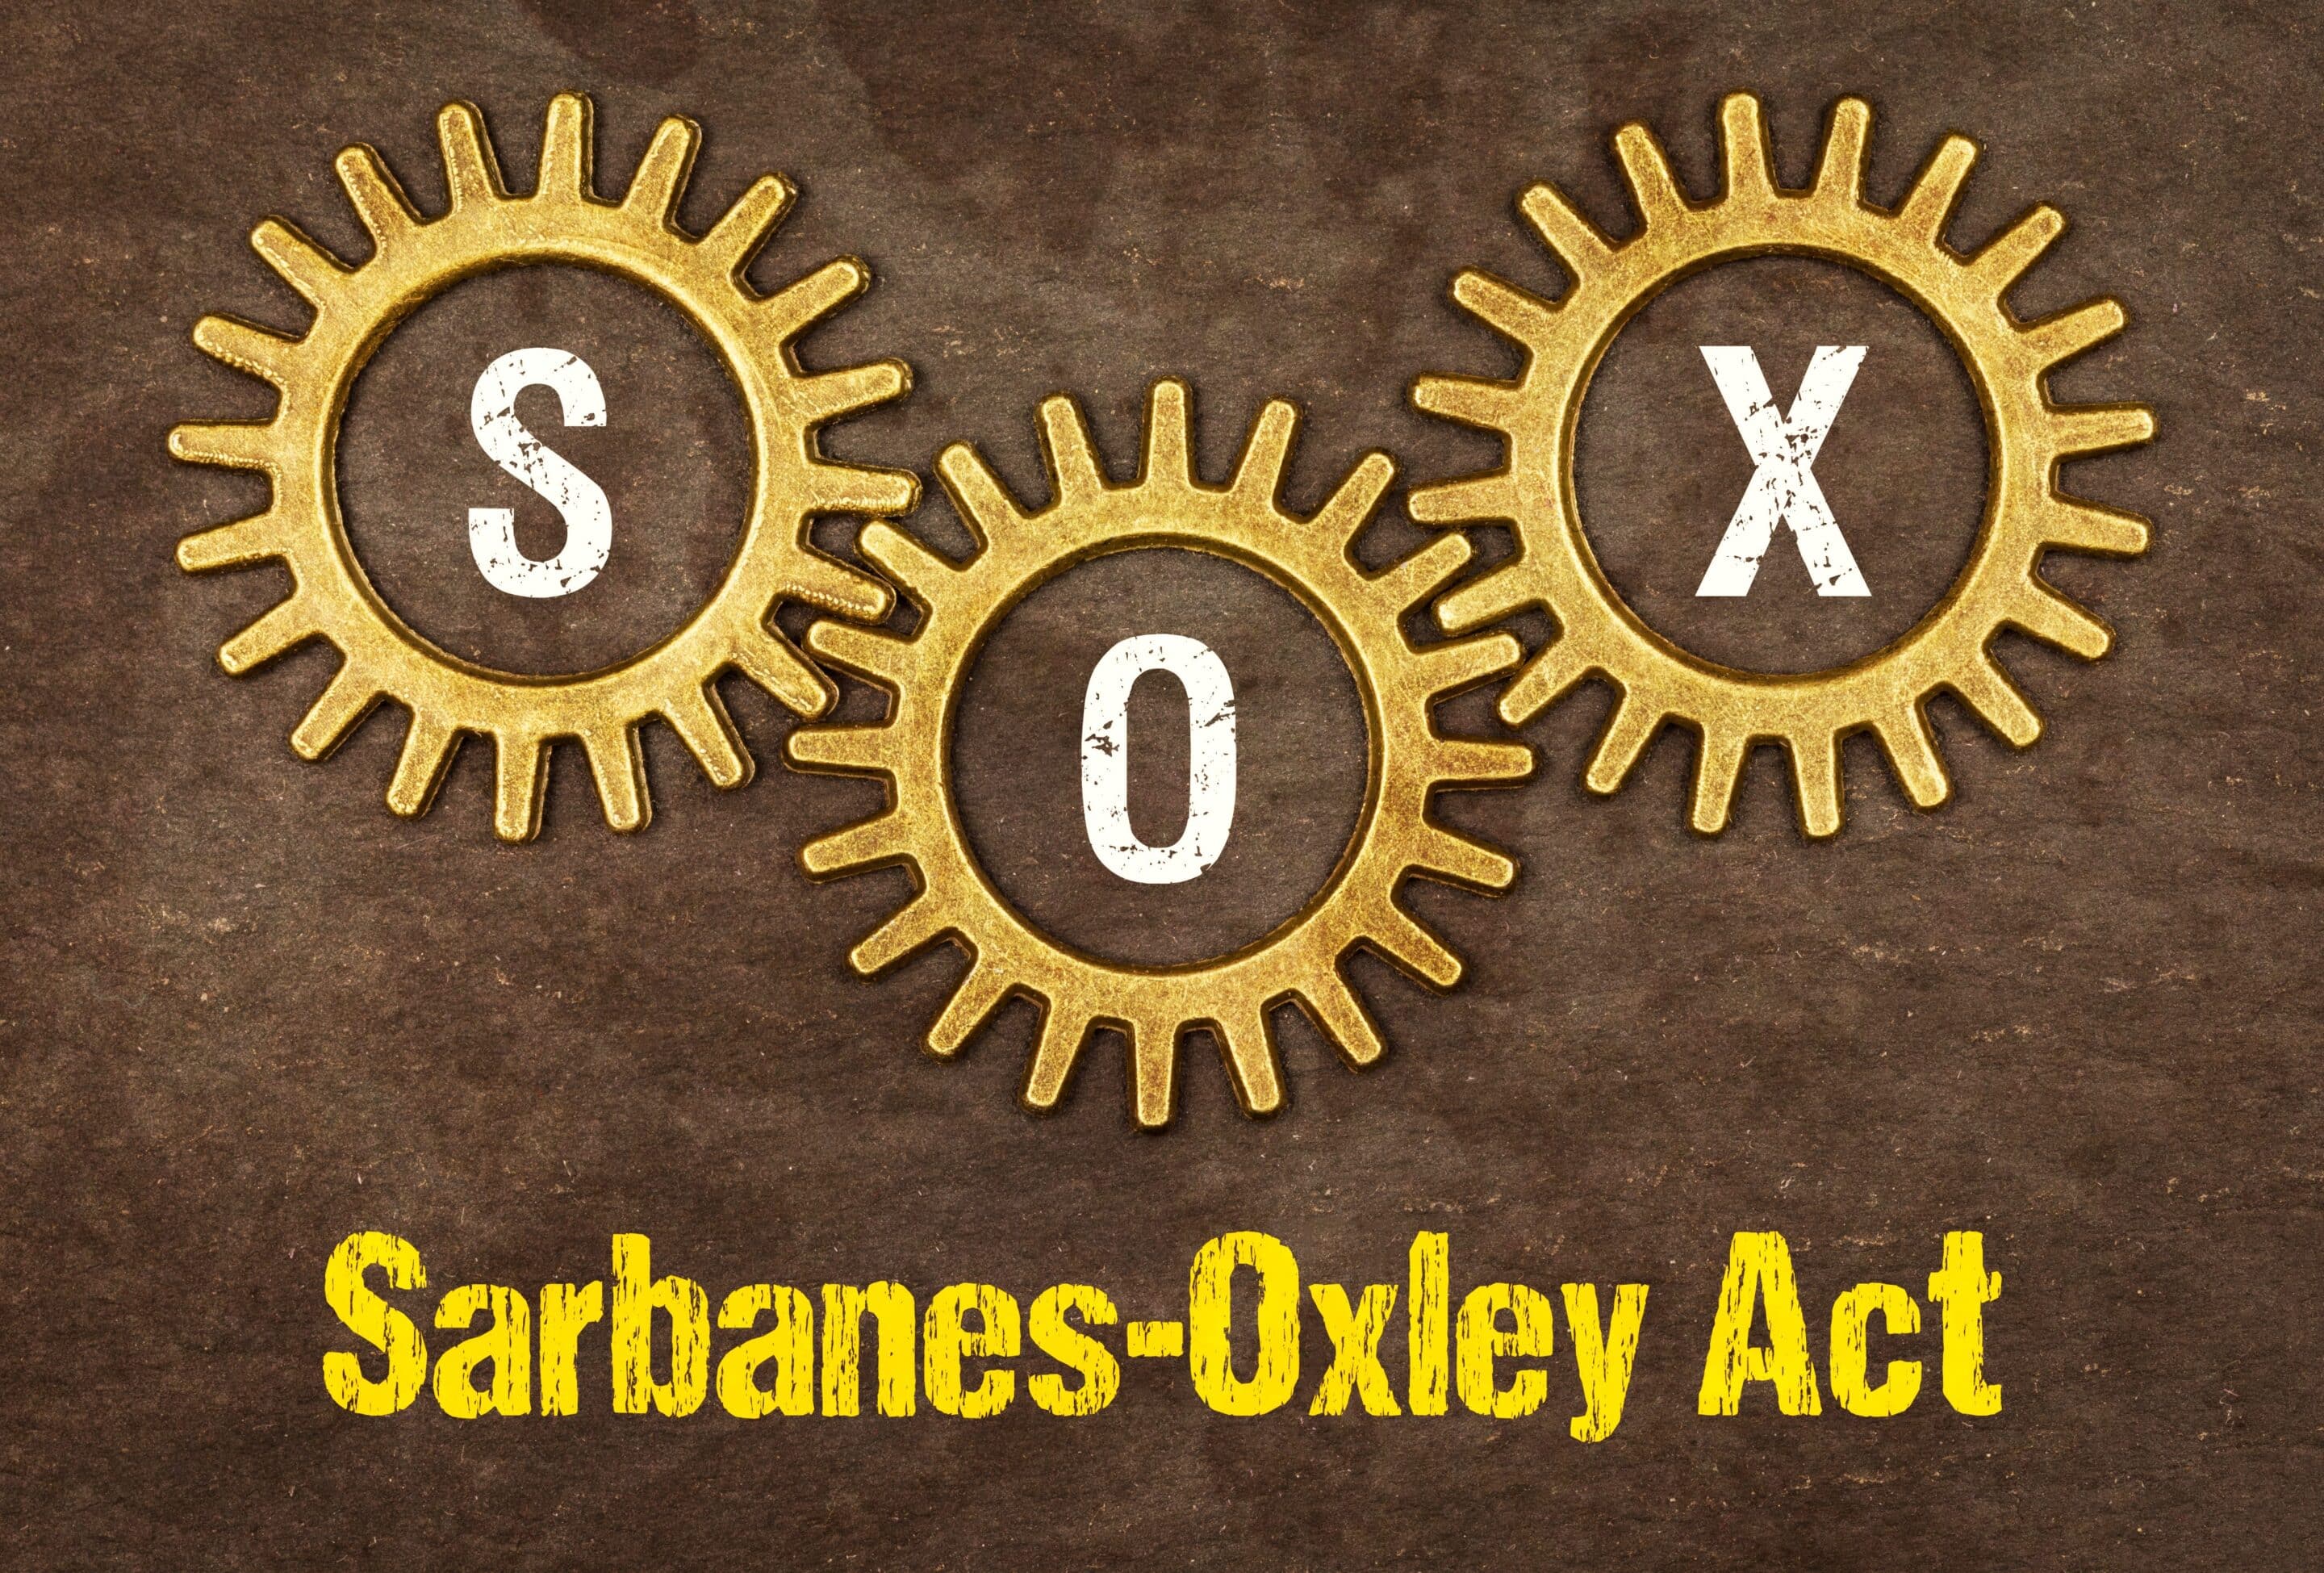 The acronym SOX in gears with Sarbanes-Oxley Act below them against a brown paper background.